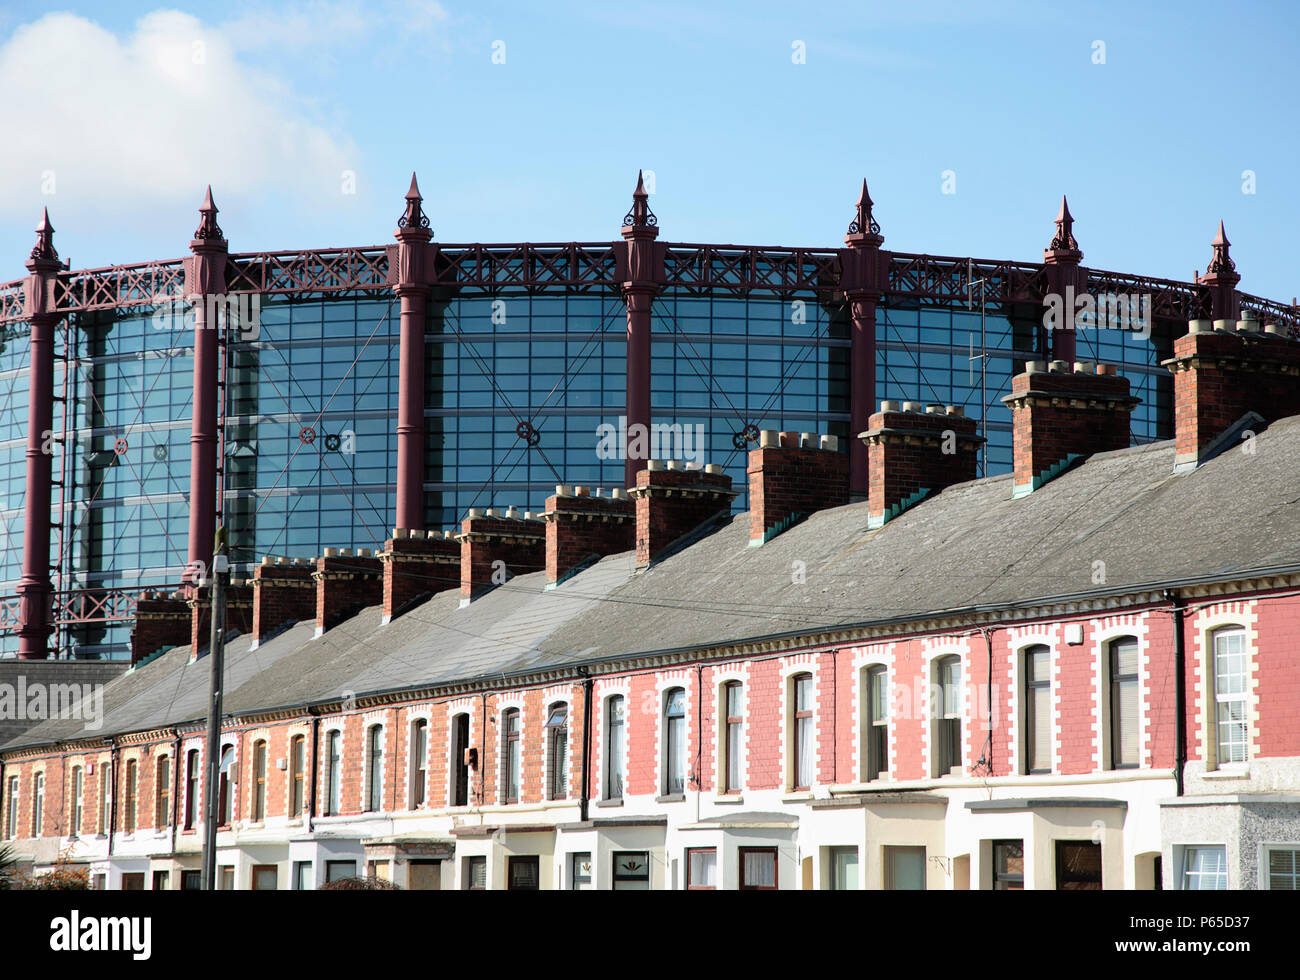 The Gasworks, Dublin, Ireland, 2008. Old gasometer converted into luxury apartments. Stock Photo